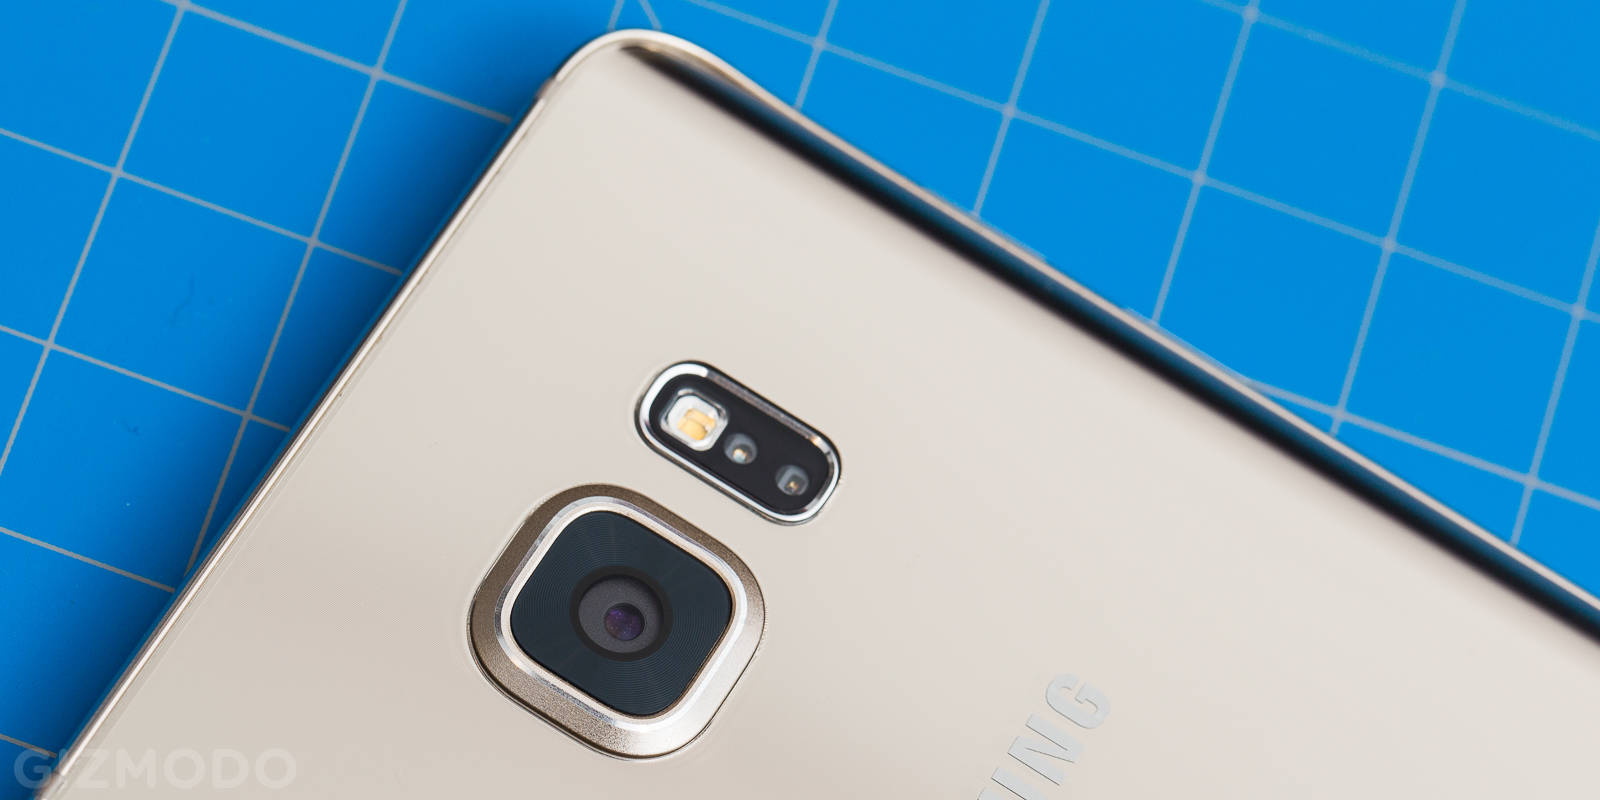 Samsung Galaxy Note 5 Review: The Best High-End Android Phone